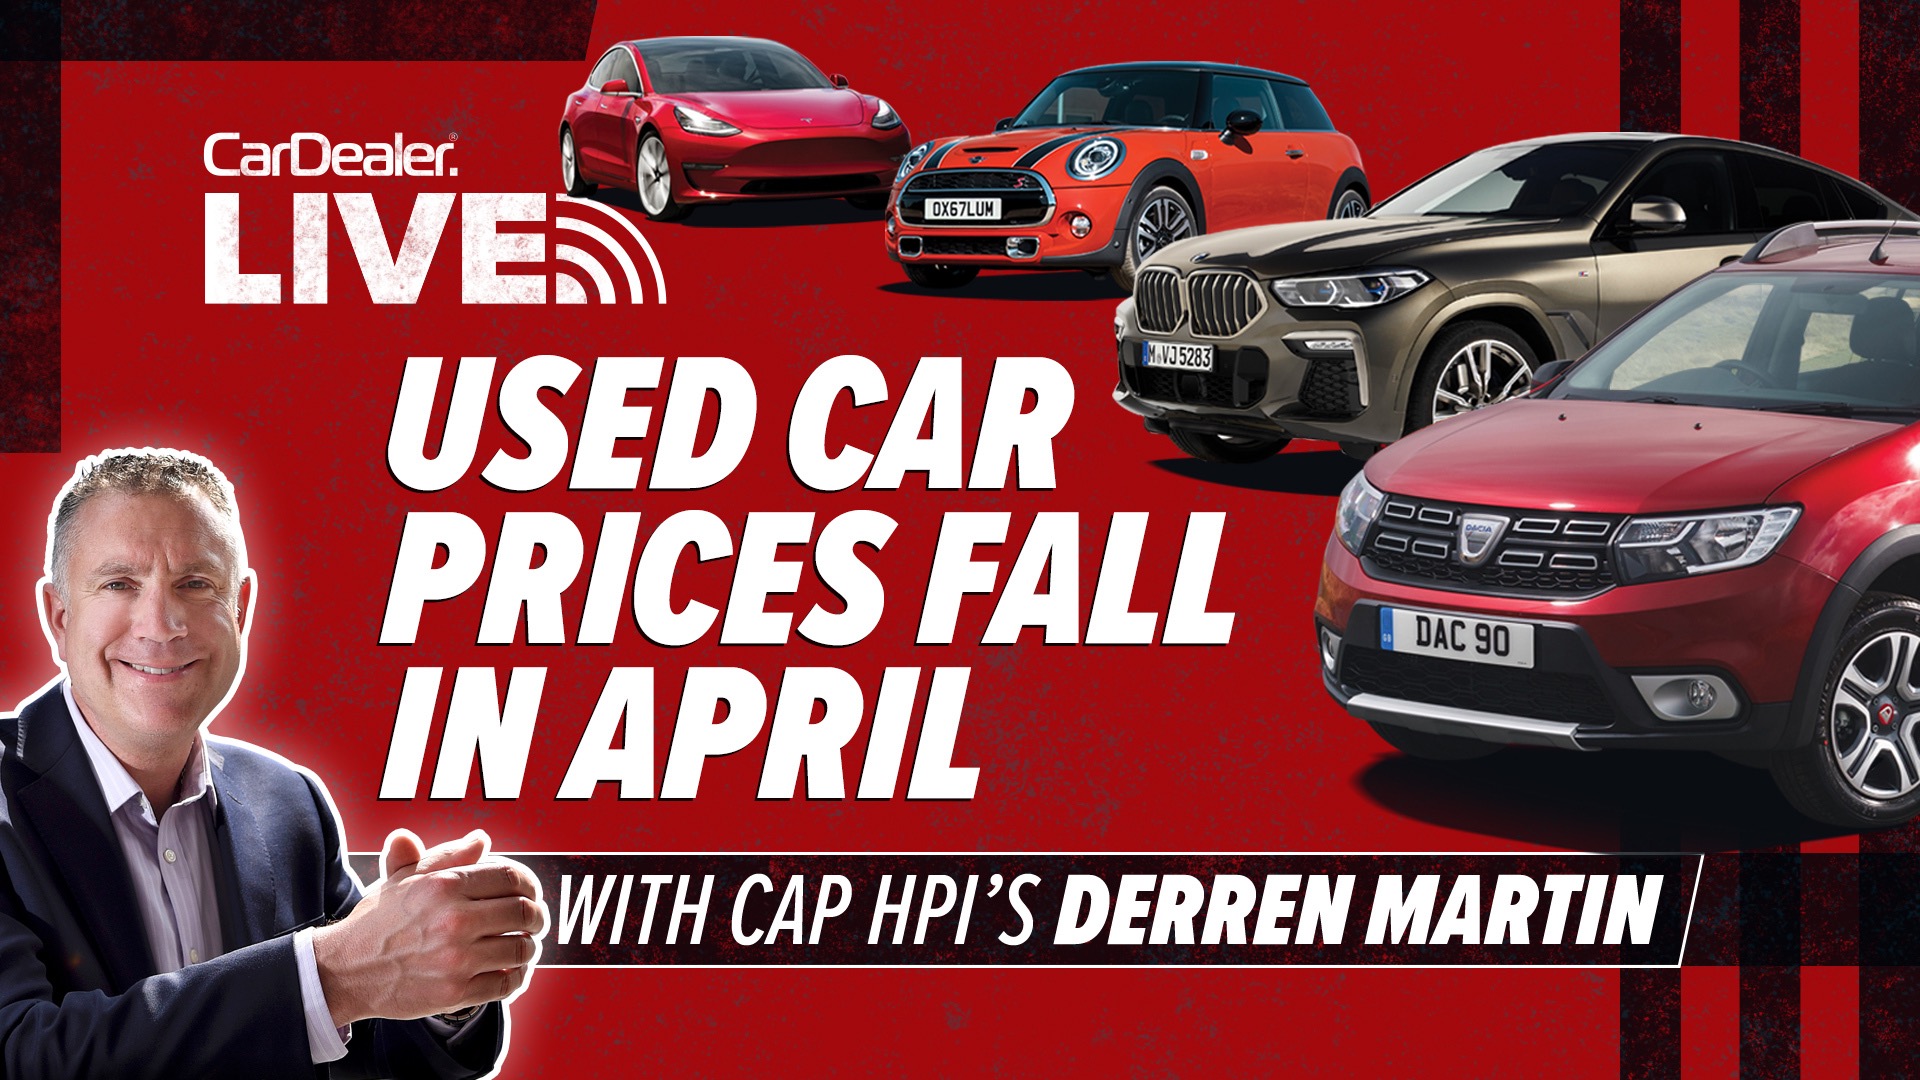 Exclusive Used car prices fell AGAIN in April but not by as much as